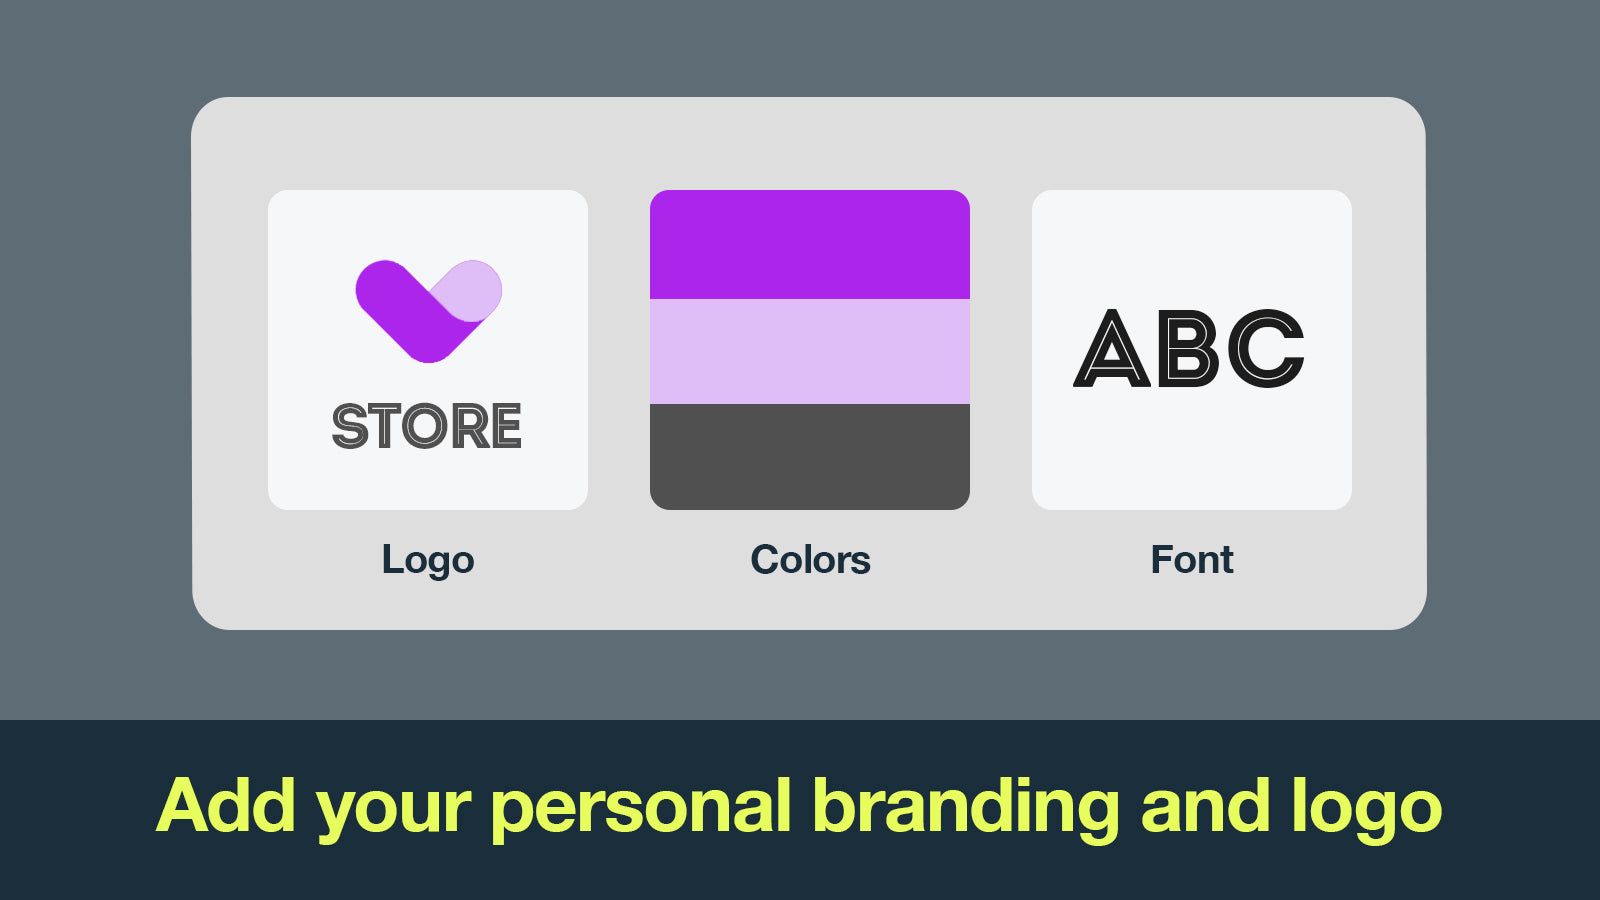 Customize your video with your brand’s font and colors